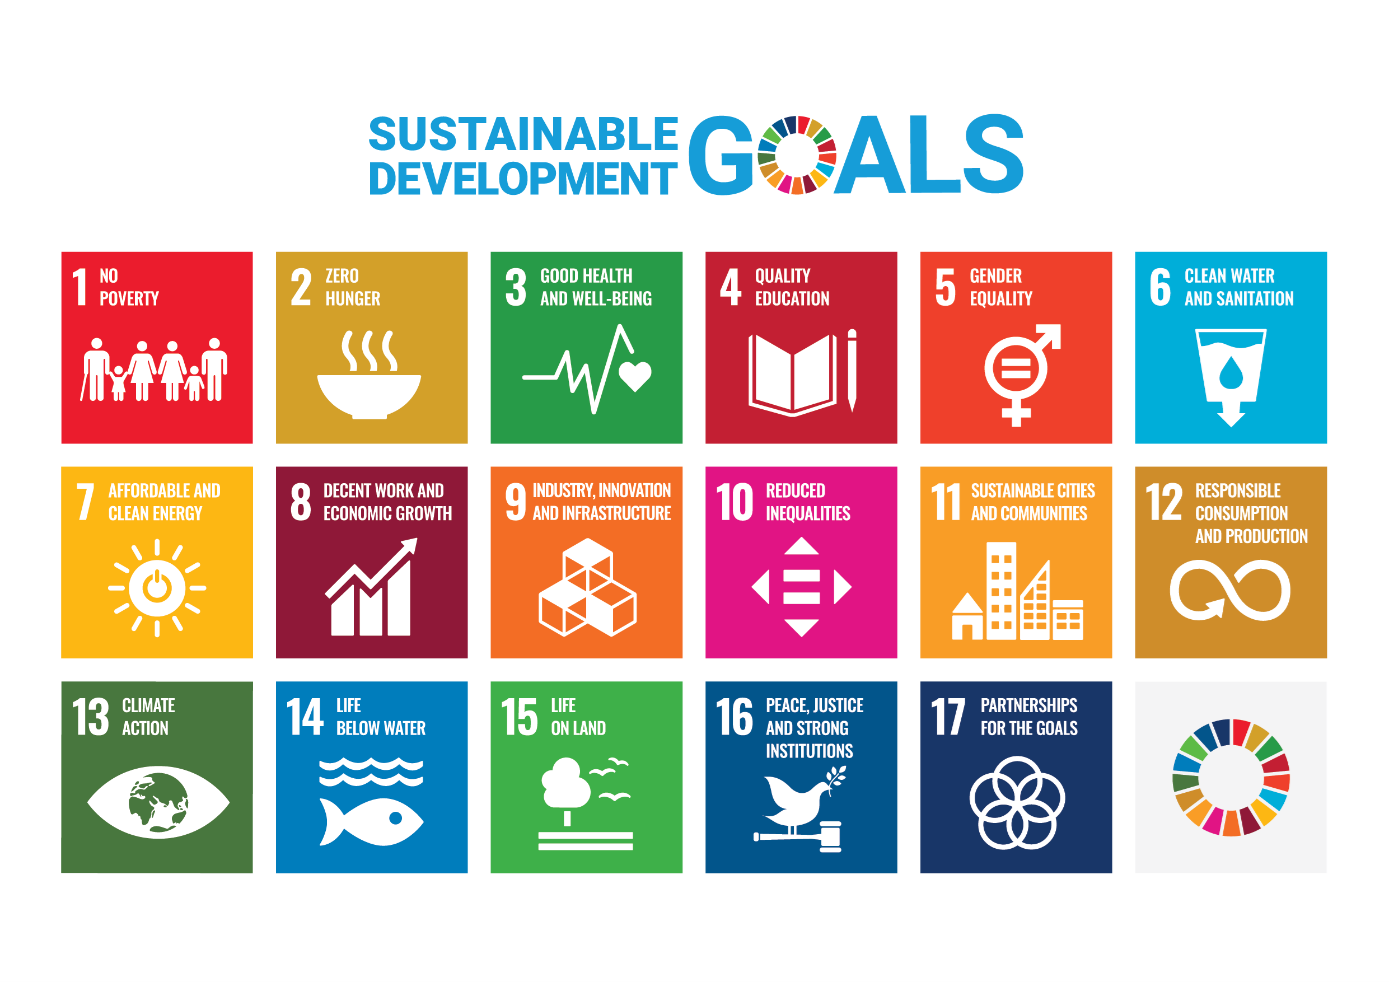 The United Nations Sustainable Development Goals web site: https://www.un.org/sustainabledevelopment